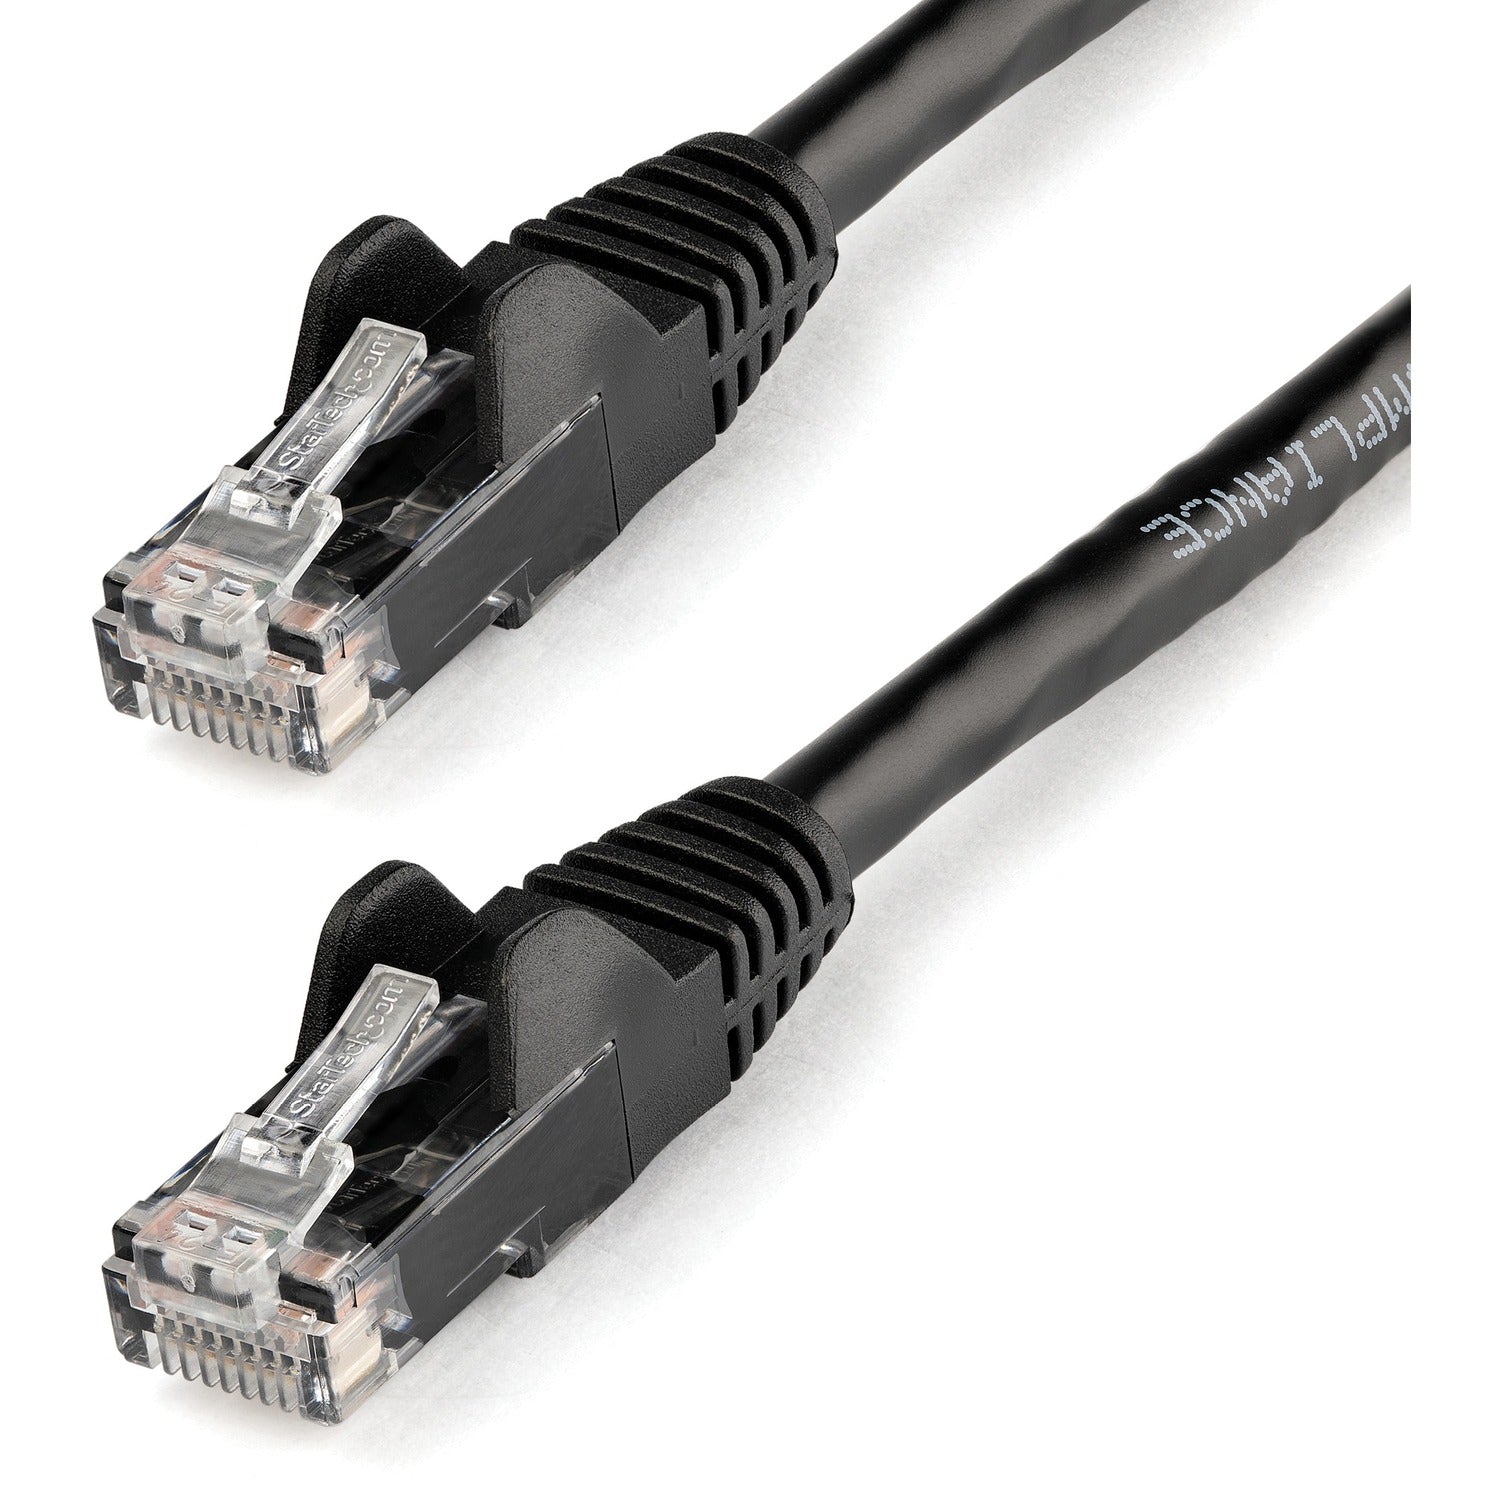 StarTech.com 6ft CAT6 Ethernet Cable - Black Snagless Gigabit - 100W PoE UTP 650MHz Category 6 Patch Cord UL Certified Wiring/TIA